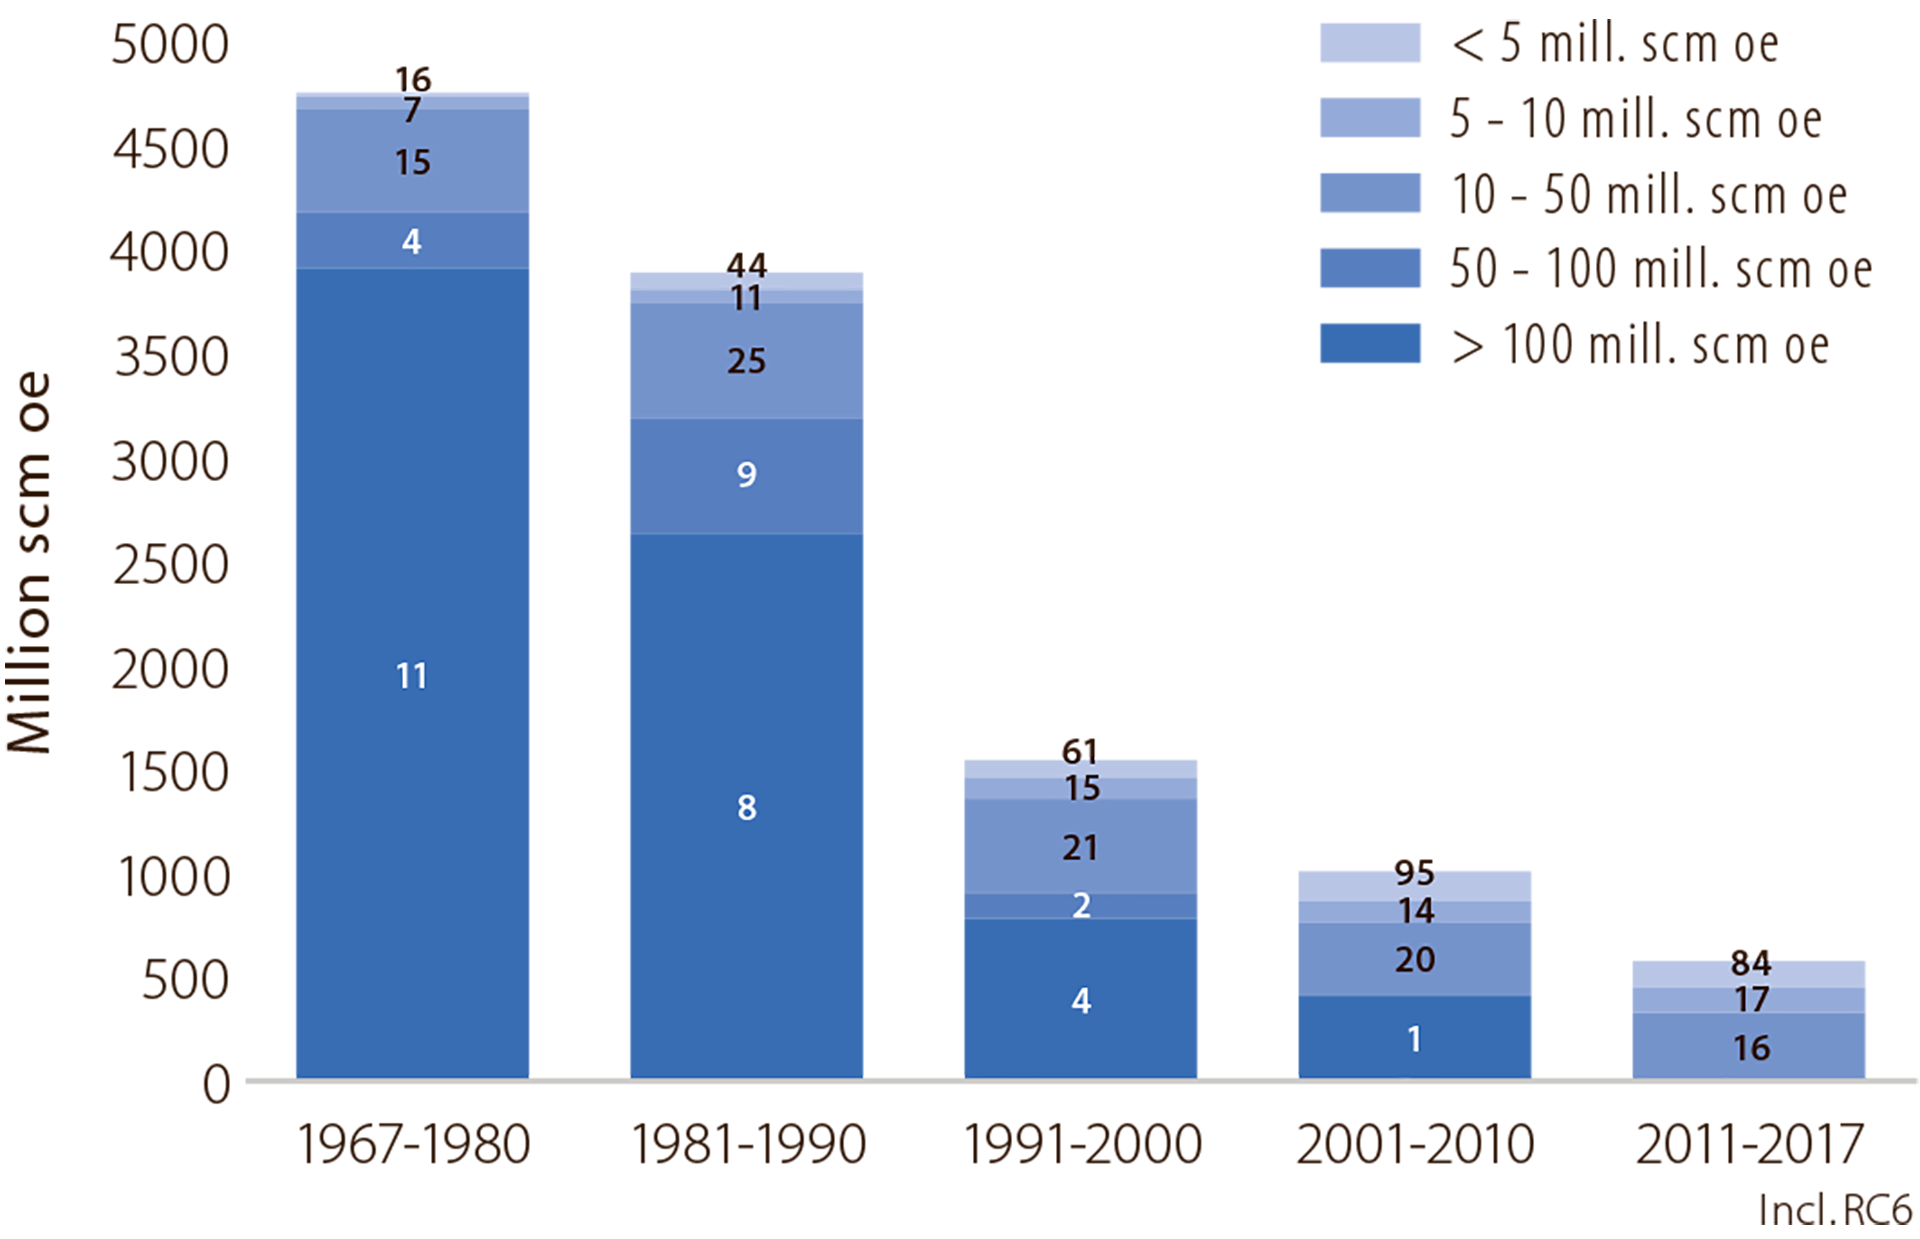 Figure 2.4 Resource growth by discovery size. The number of discoveries is shown in the bars.